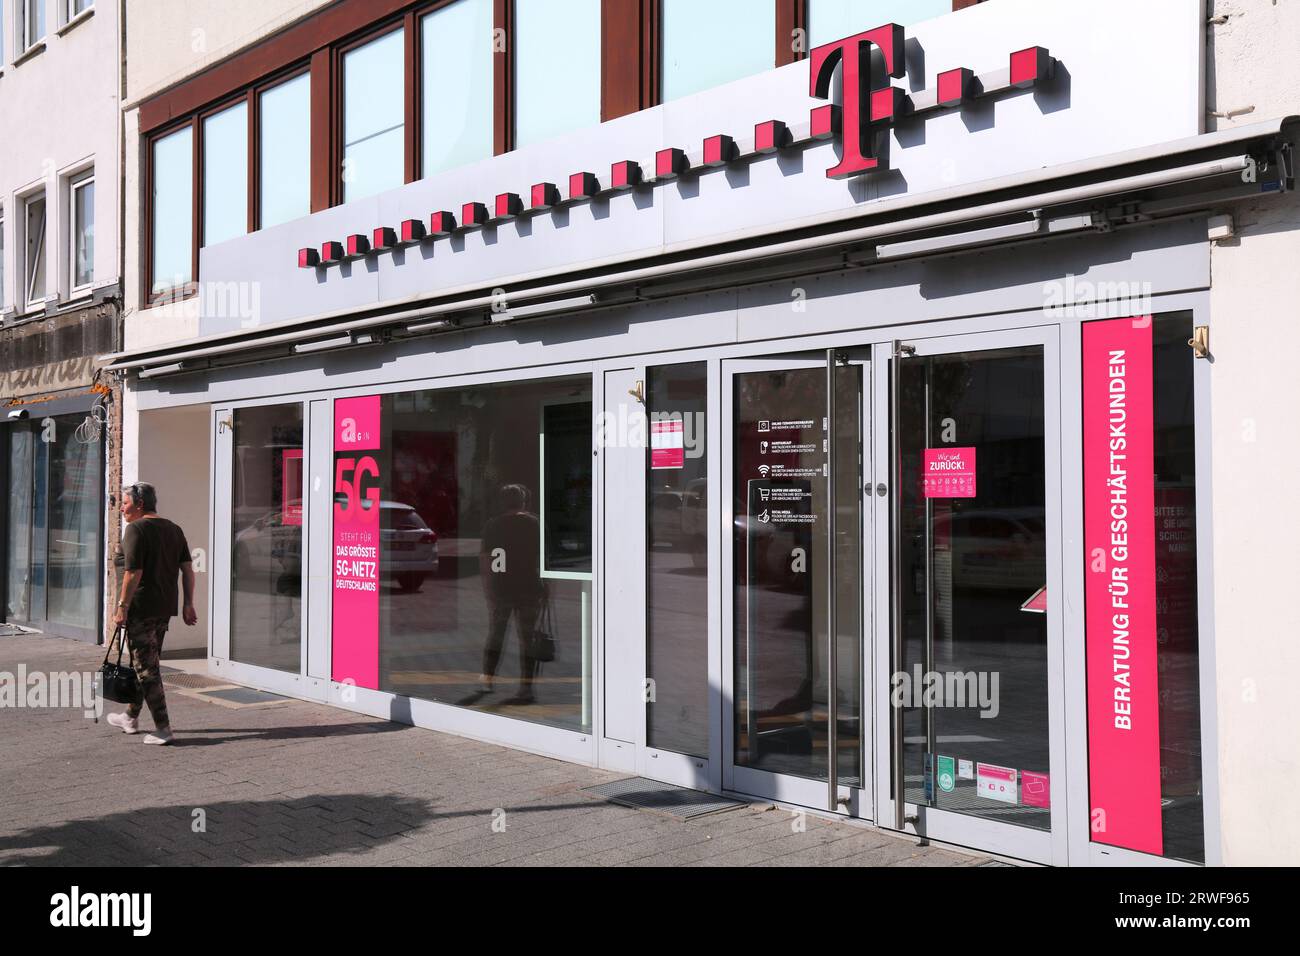 MOENCHENGLADBACH, GERMANY - SEPTEMBER 18, 2020: T-Mobile brand mobile network office in Moenchengladbach. T-Mobile is a mobile operator owned by Deuts Stock Photo